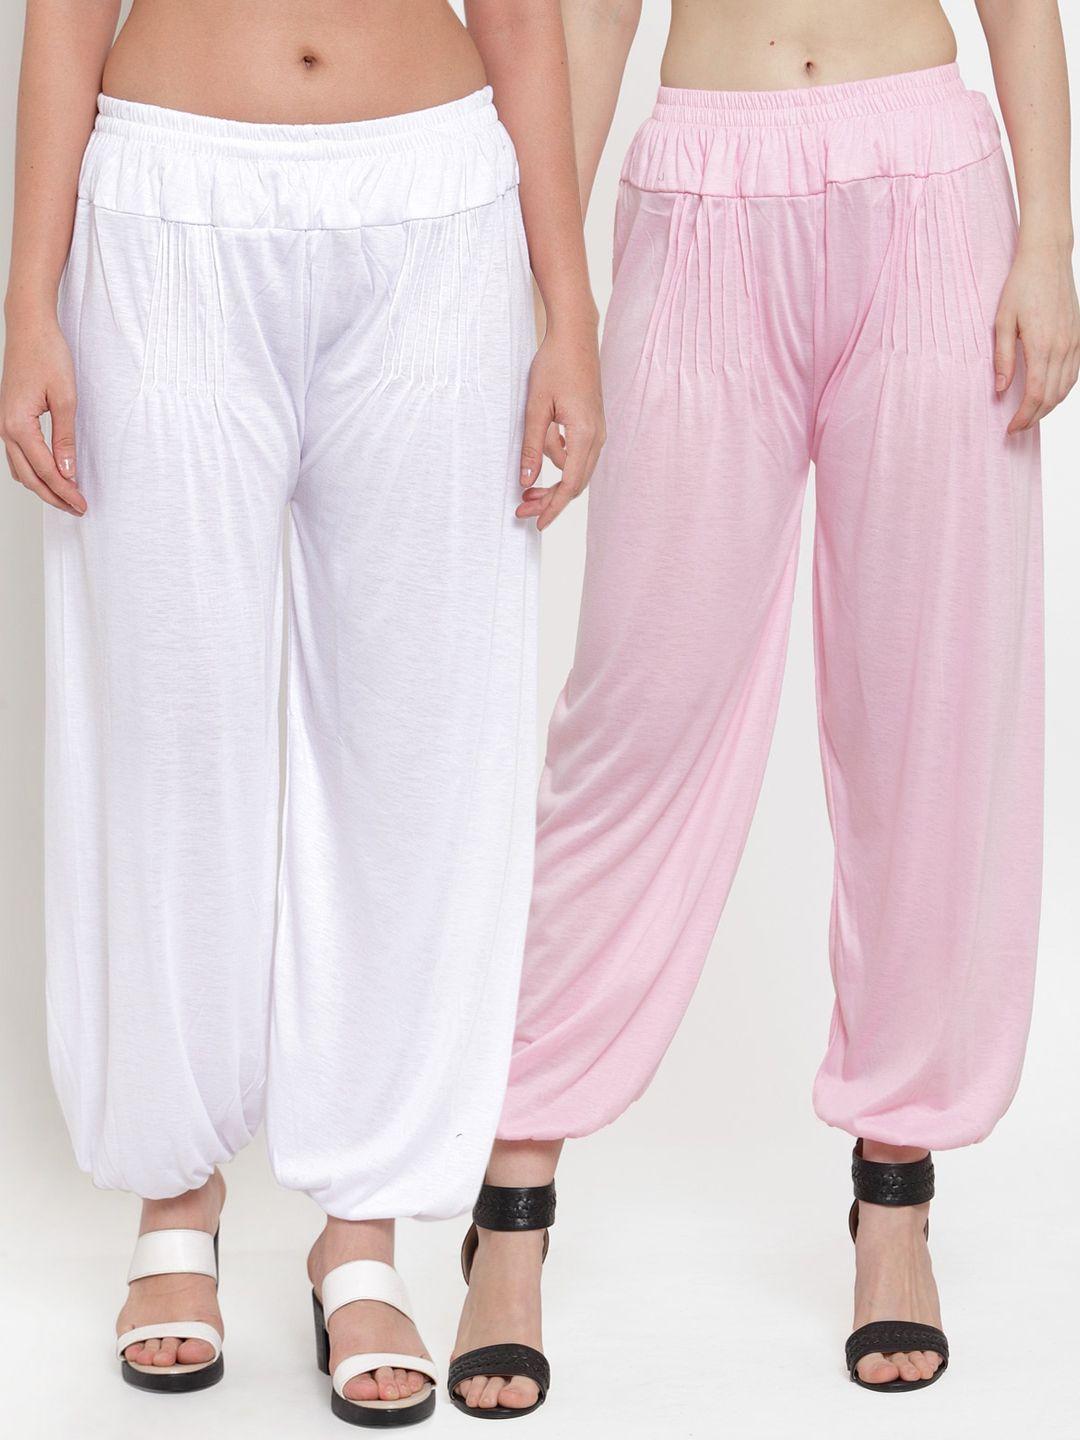 gracit women pack of 2 white & pink solid harem pants